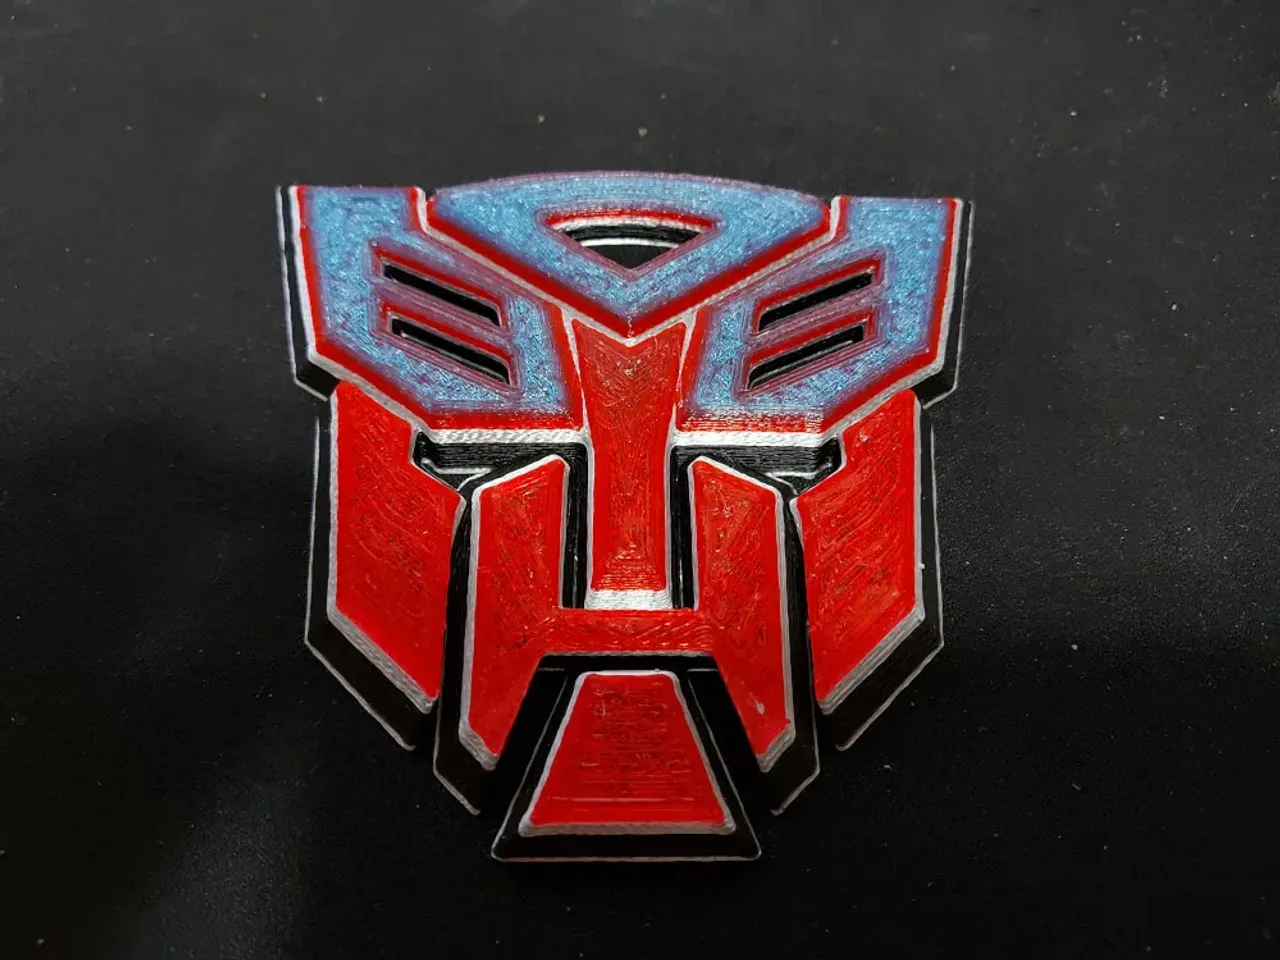 NEW Car 3D Metal Car Stickers Transformers Decepticon Badge Emblem Tail  Decal Cool Autobots Logo Car Styling Motorcycle Car Accessories. - Etsy